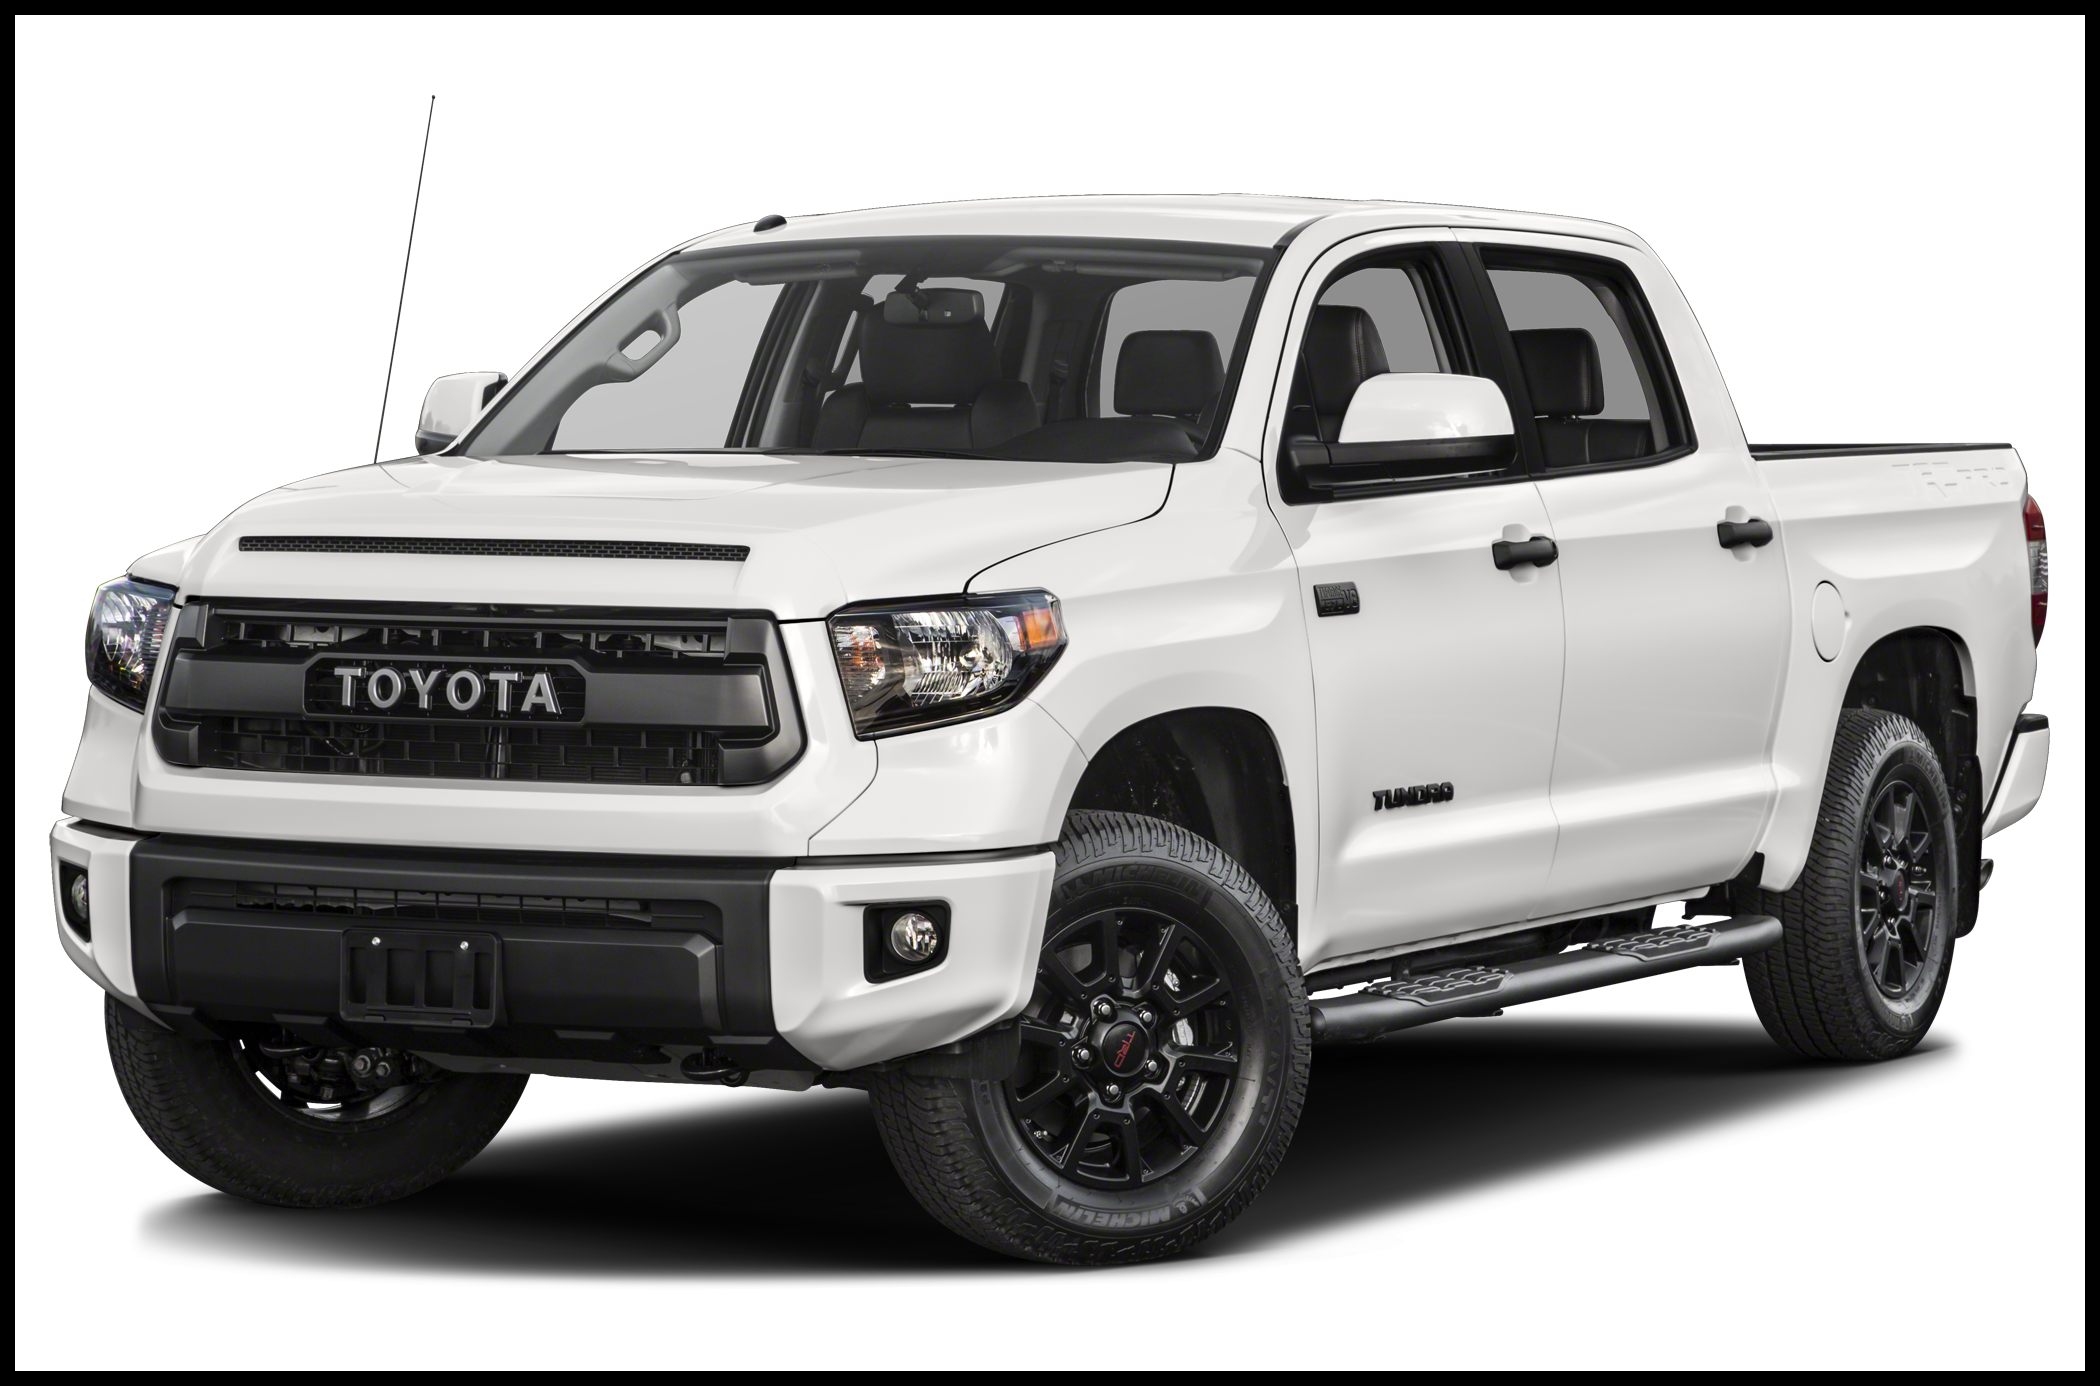 2017 Toyota Tundra TRD Pro 5 7L V8 4x4 CrewMax 5 6 ft box 145 7 in WB for Sale